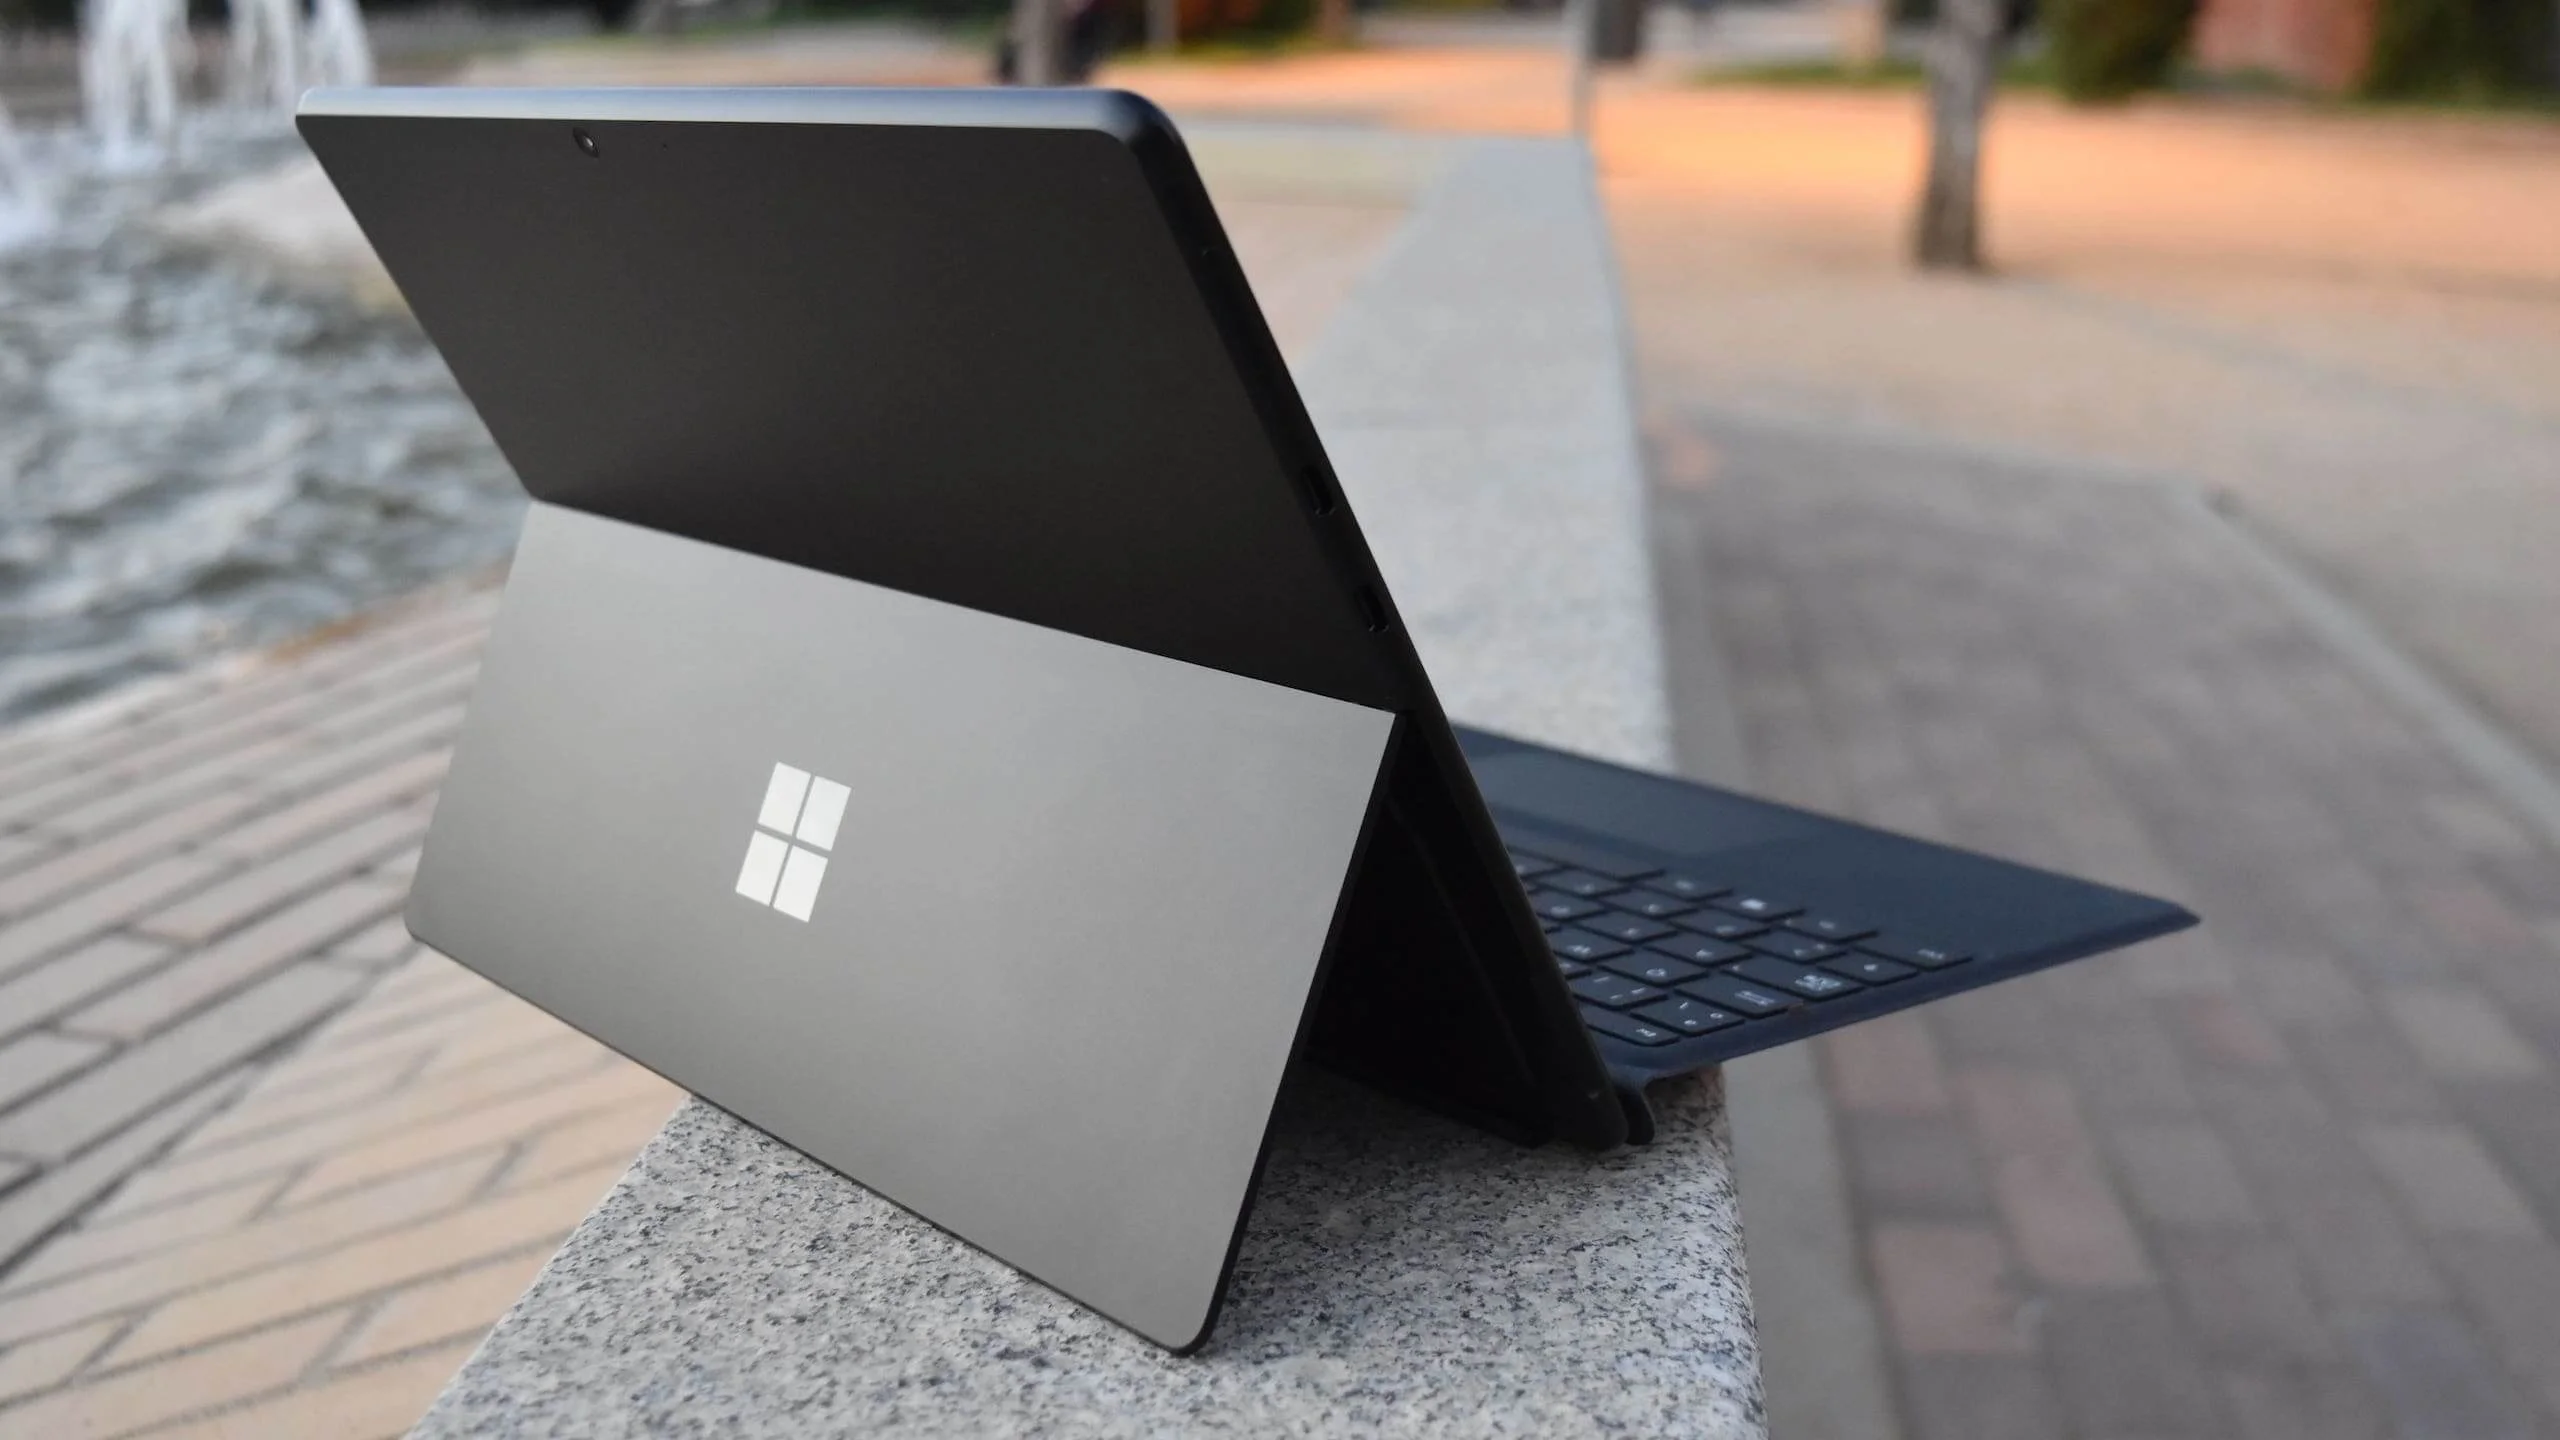 Microsoft Surface Pro 9 will receive an ARM platform instead of an Intel processor